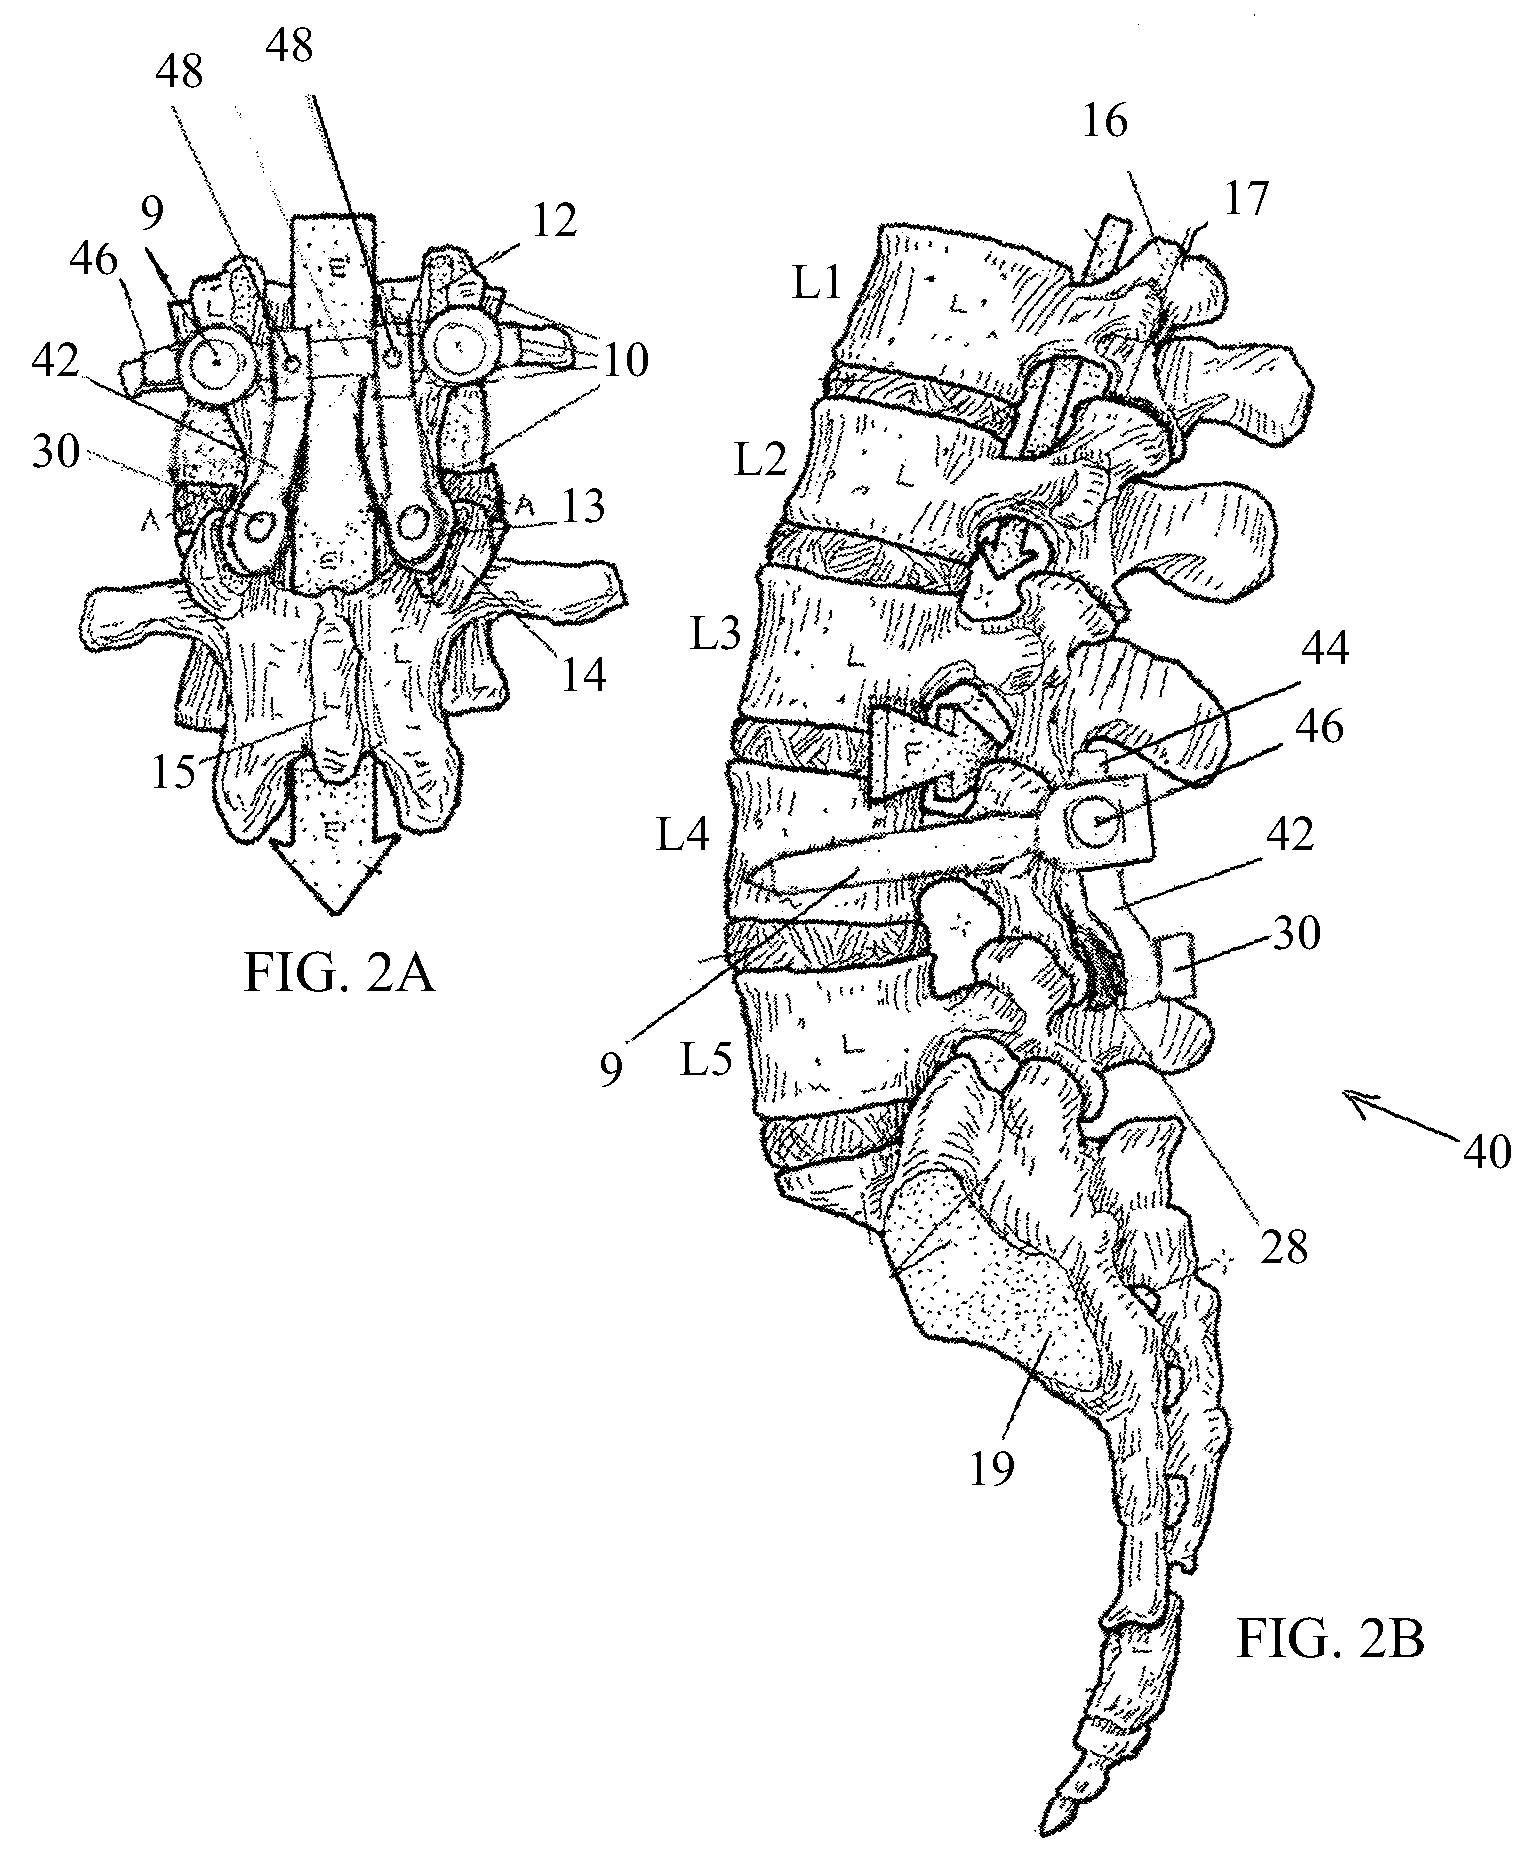 Posterior-medial facet support assembly